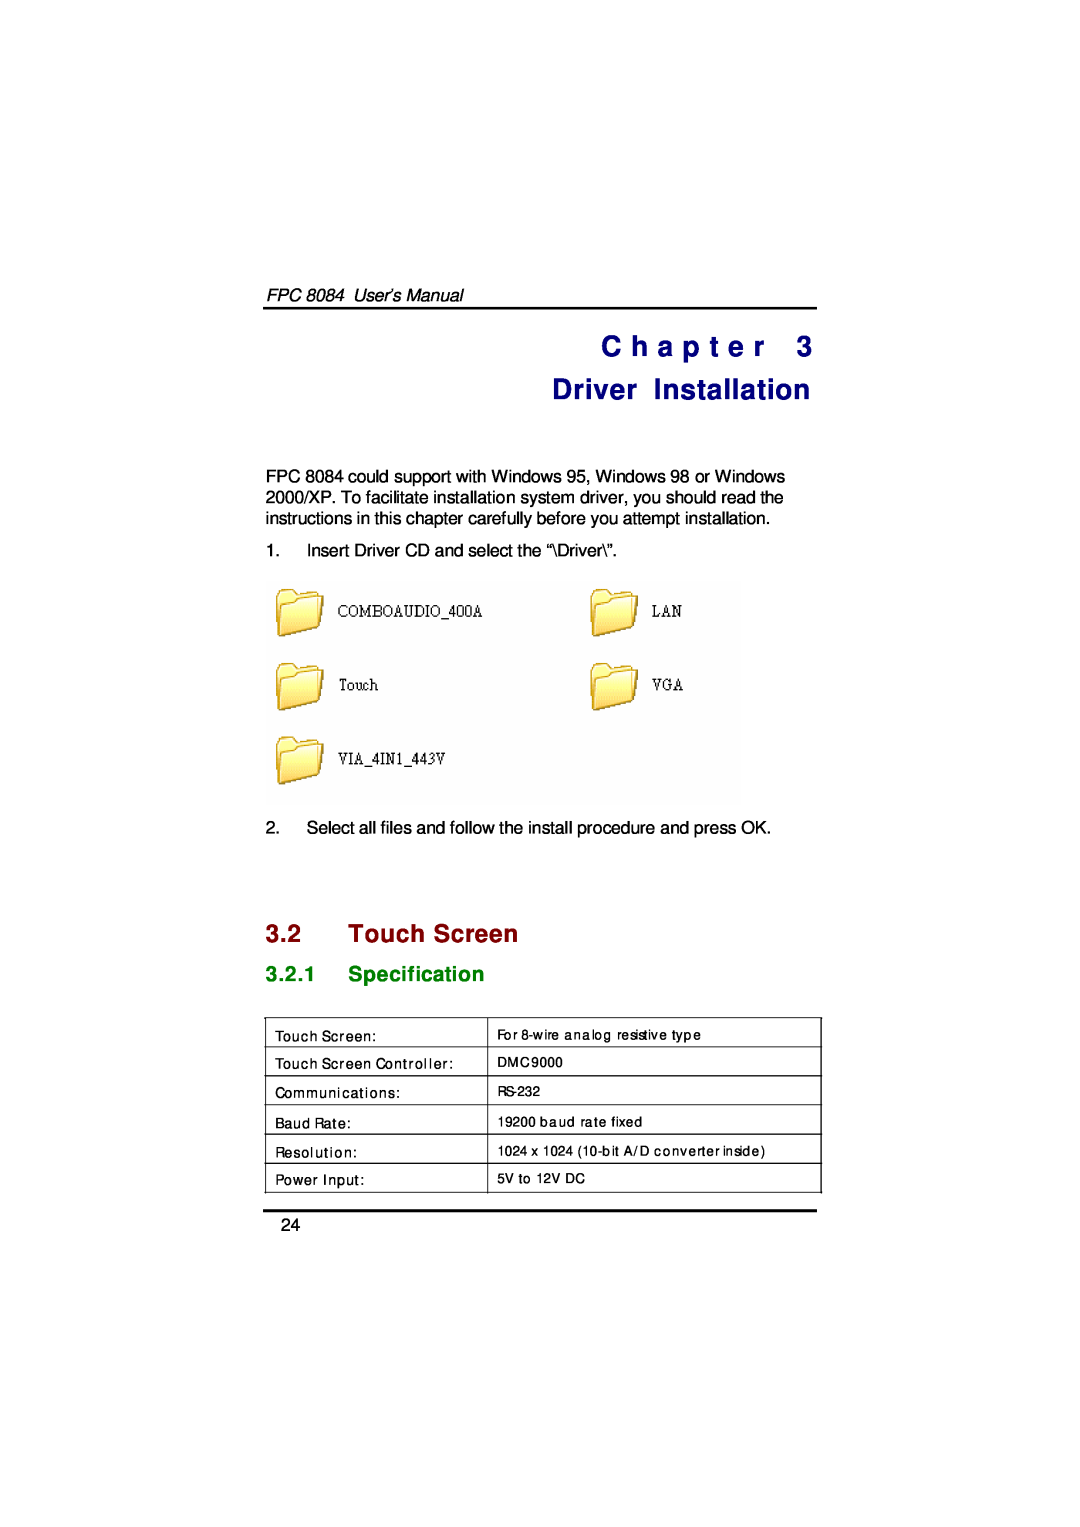 Acnodes user manual C h a p t e r Driver Installation, 3.2Touch Screen, 3.2.1Specification, FPC 8084 User’s Manual 